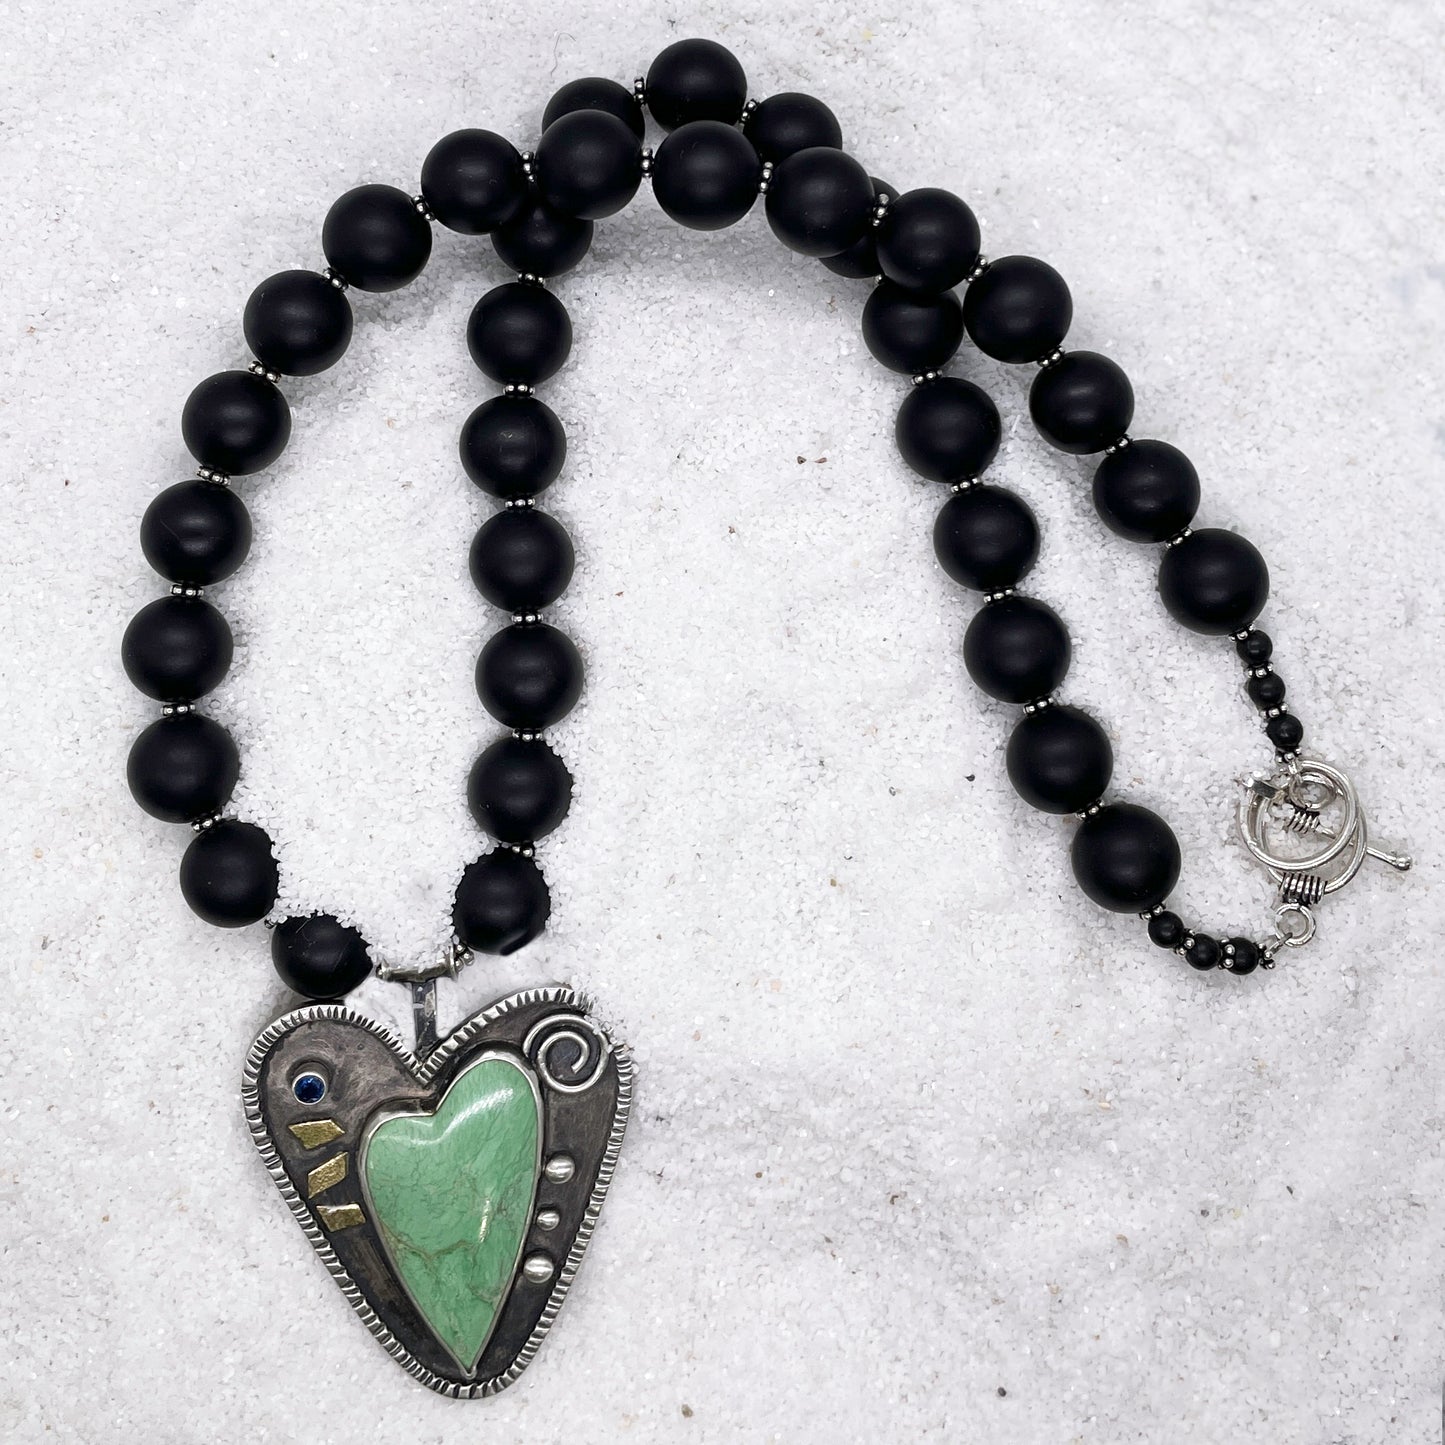 Heart Shaped Pendant with Variscite and Matte Black Onyx Necklace